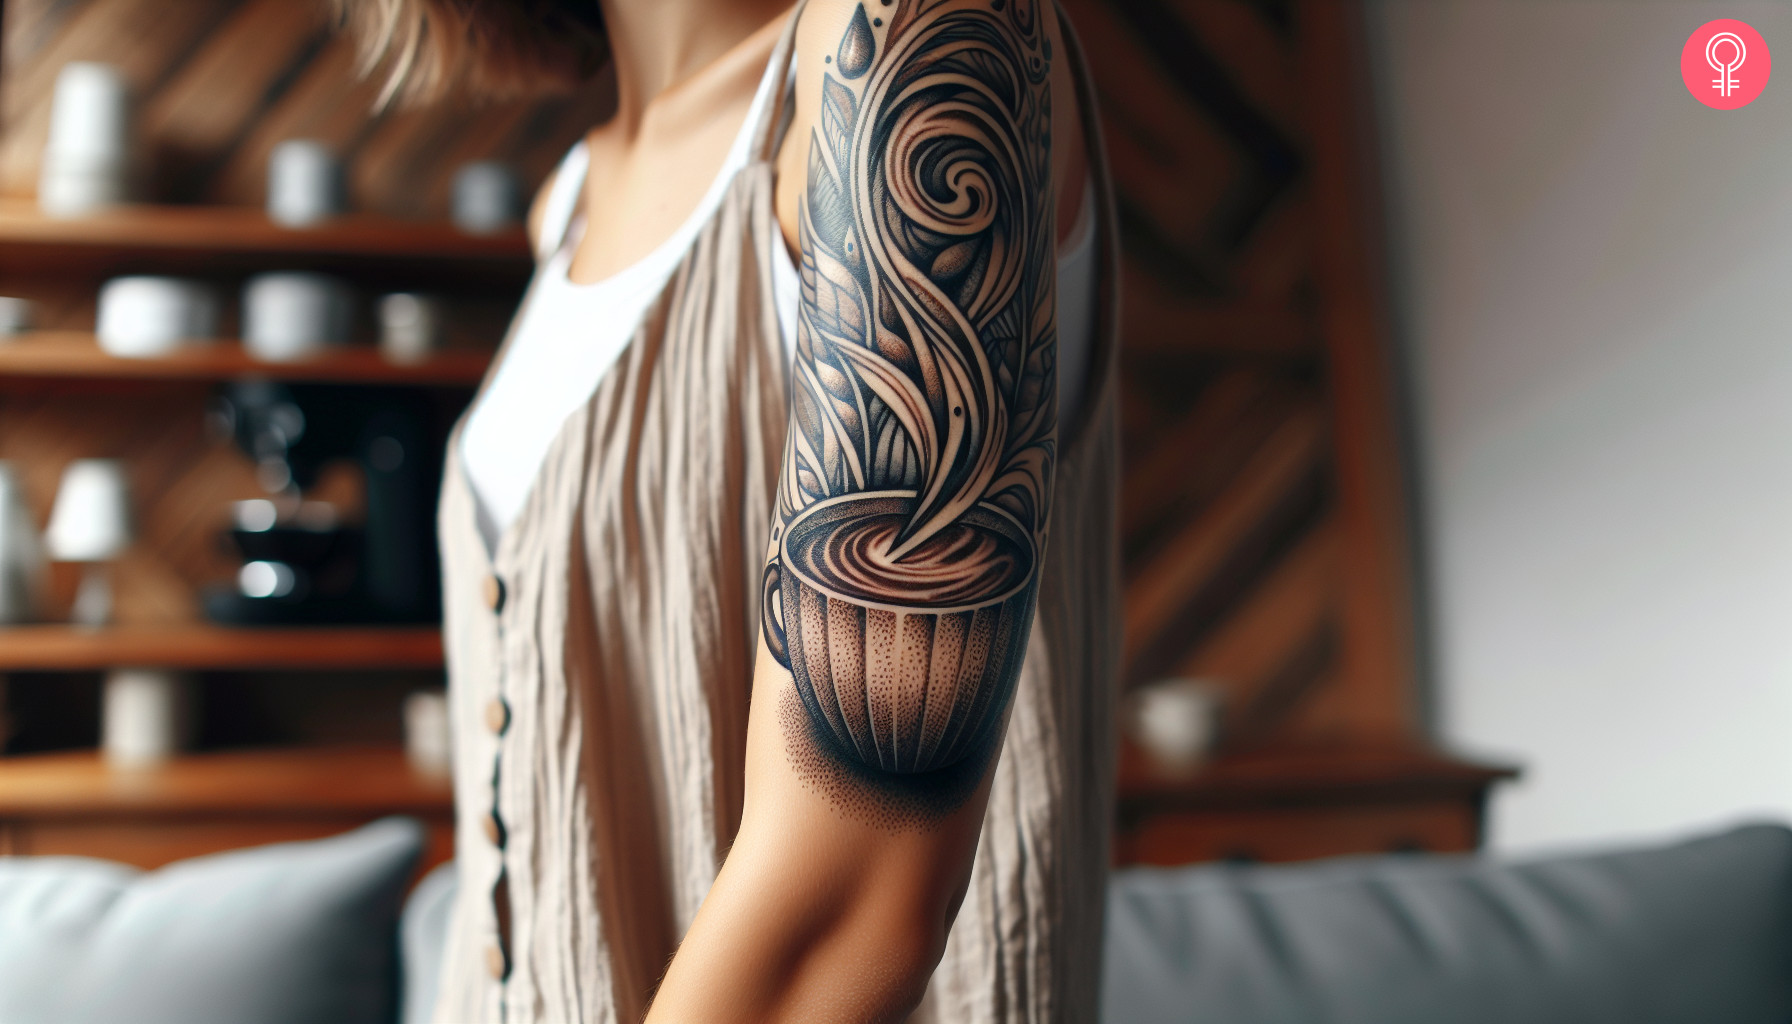 Abstract coffee cup tattoo on the arm of a woman